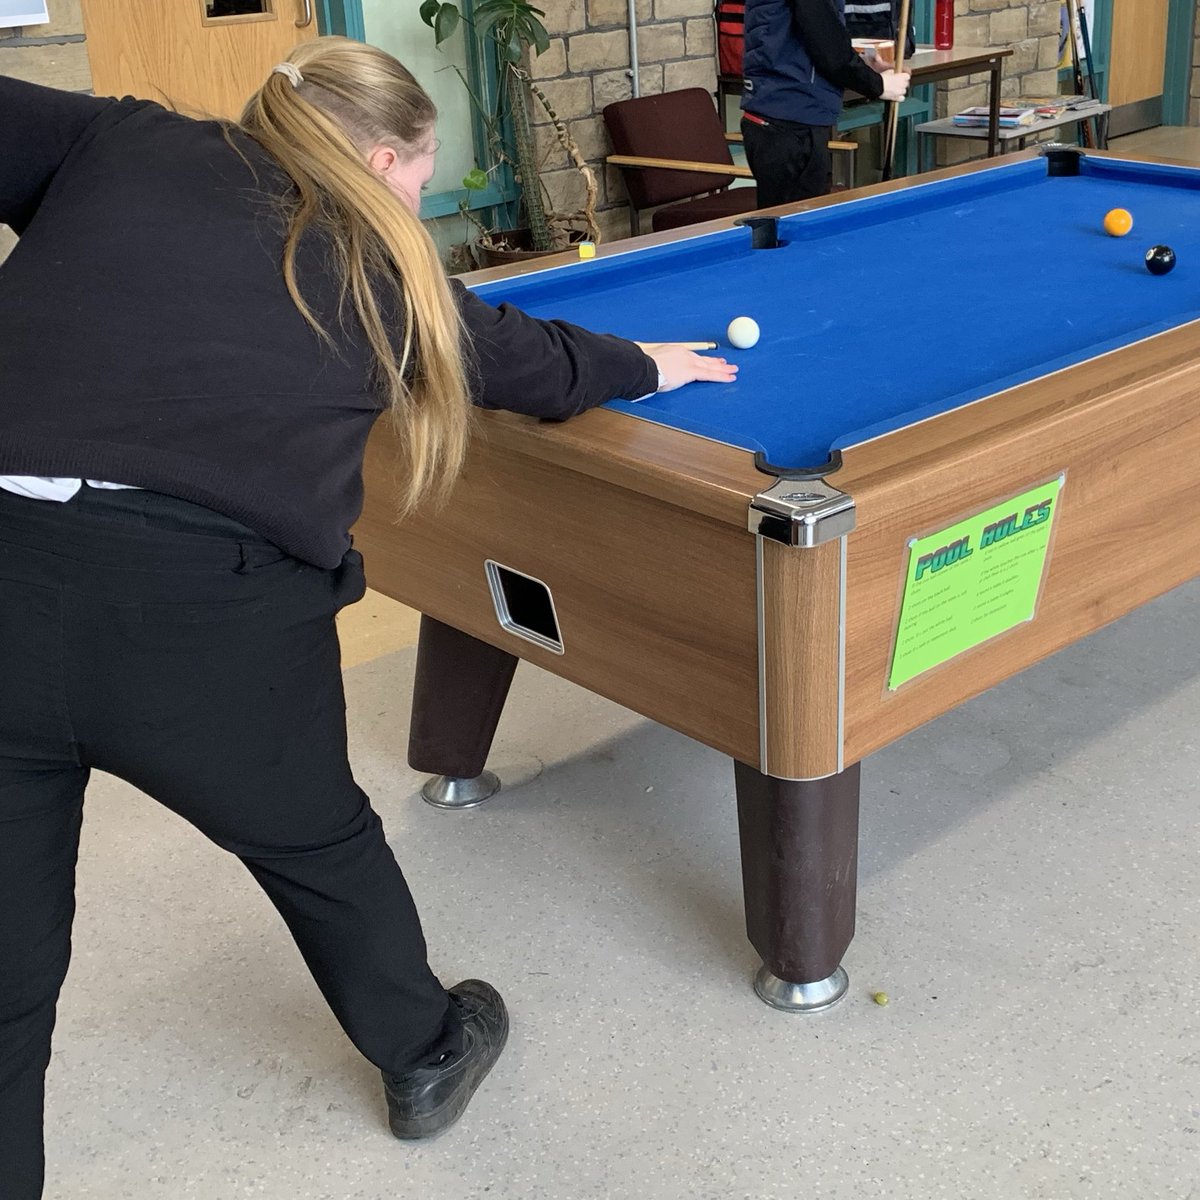 Thanks to Bradford AP for hosting a great pool tournament last week - a real success, hopefully we’ll get the better of them next time. ⁦@ImpactMAT⁩